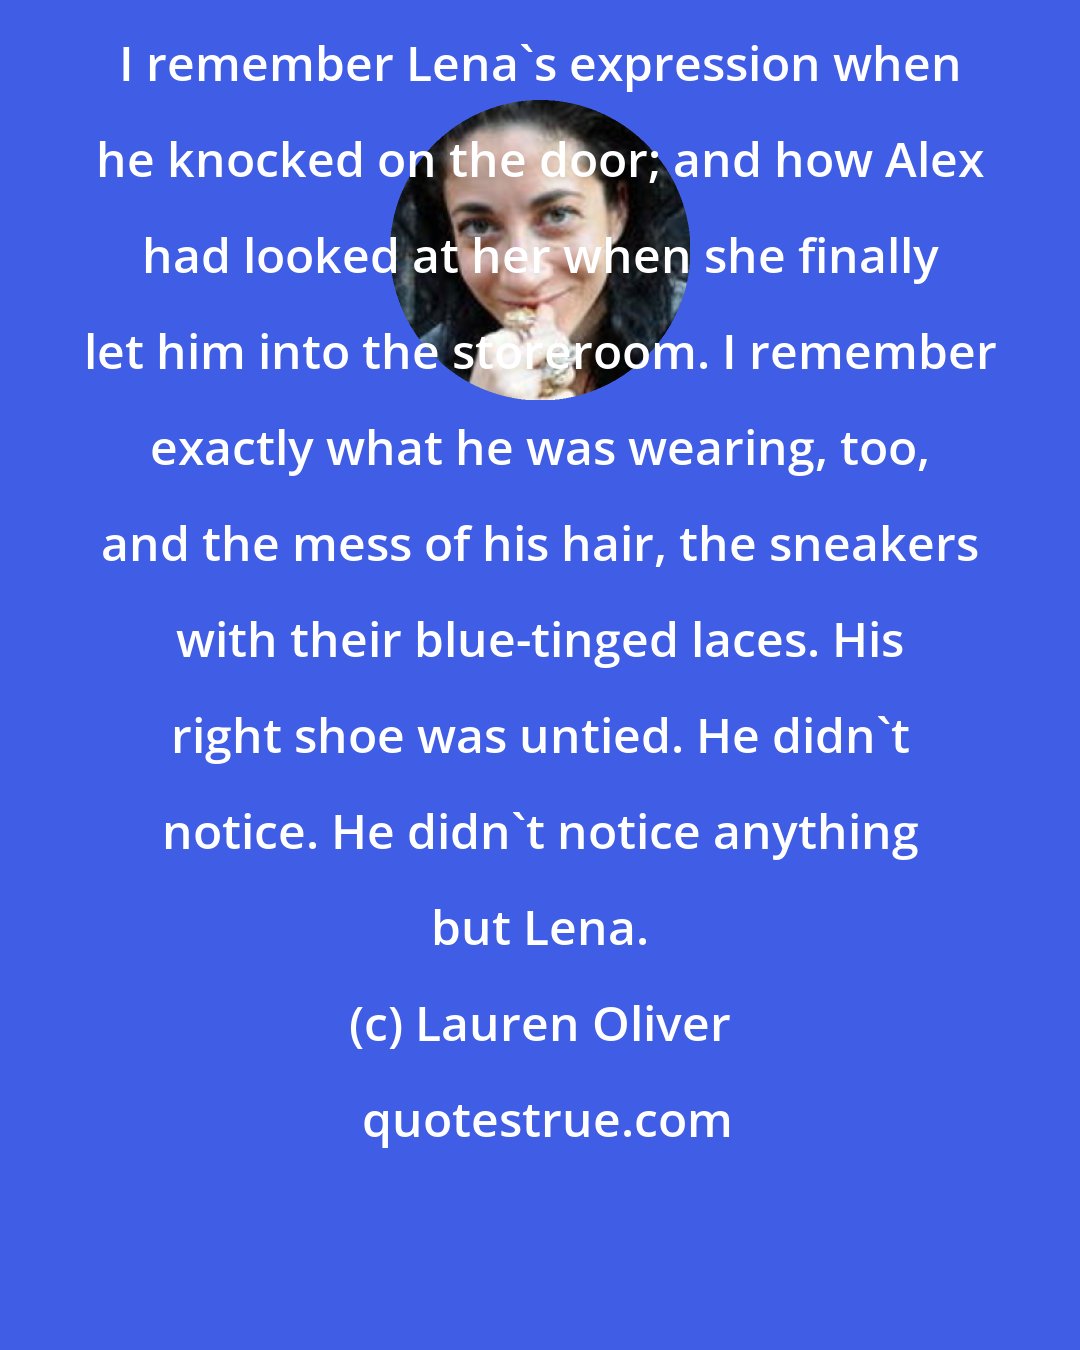 Lauren Oliver: I remember Lena's expression when he knocked on the door; and how Alex had looked at her when she finally let him into the storeroom. I remember exactly what he was wearing, too, and the mess of his hair, the sneakers with their blue-tinged laces. His right shoe was untied. He didn't notice. He didn't notice anything but Lena.